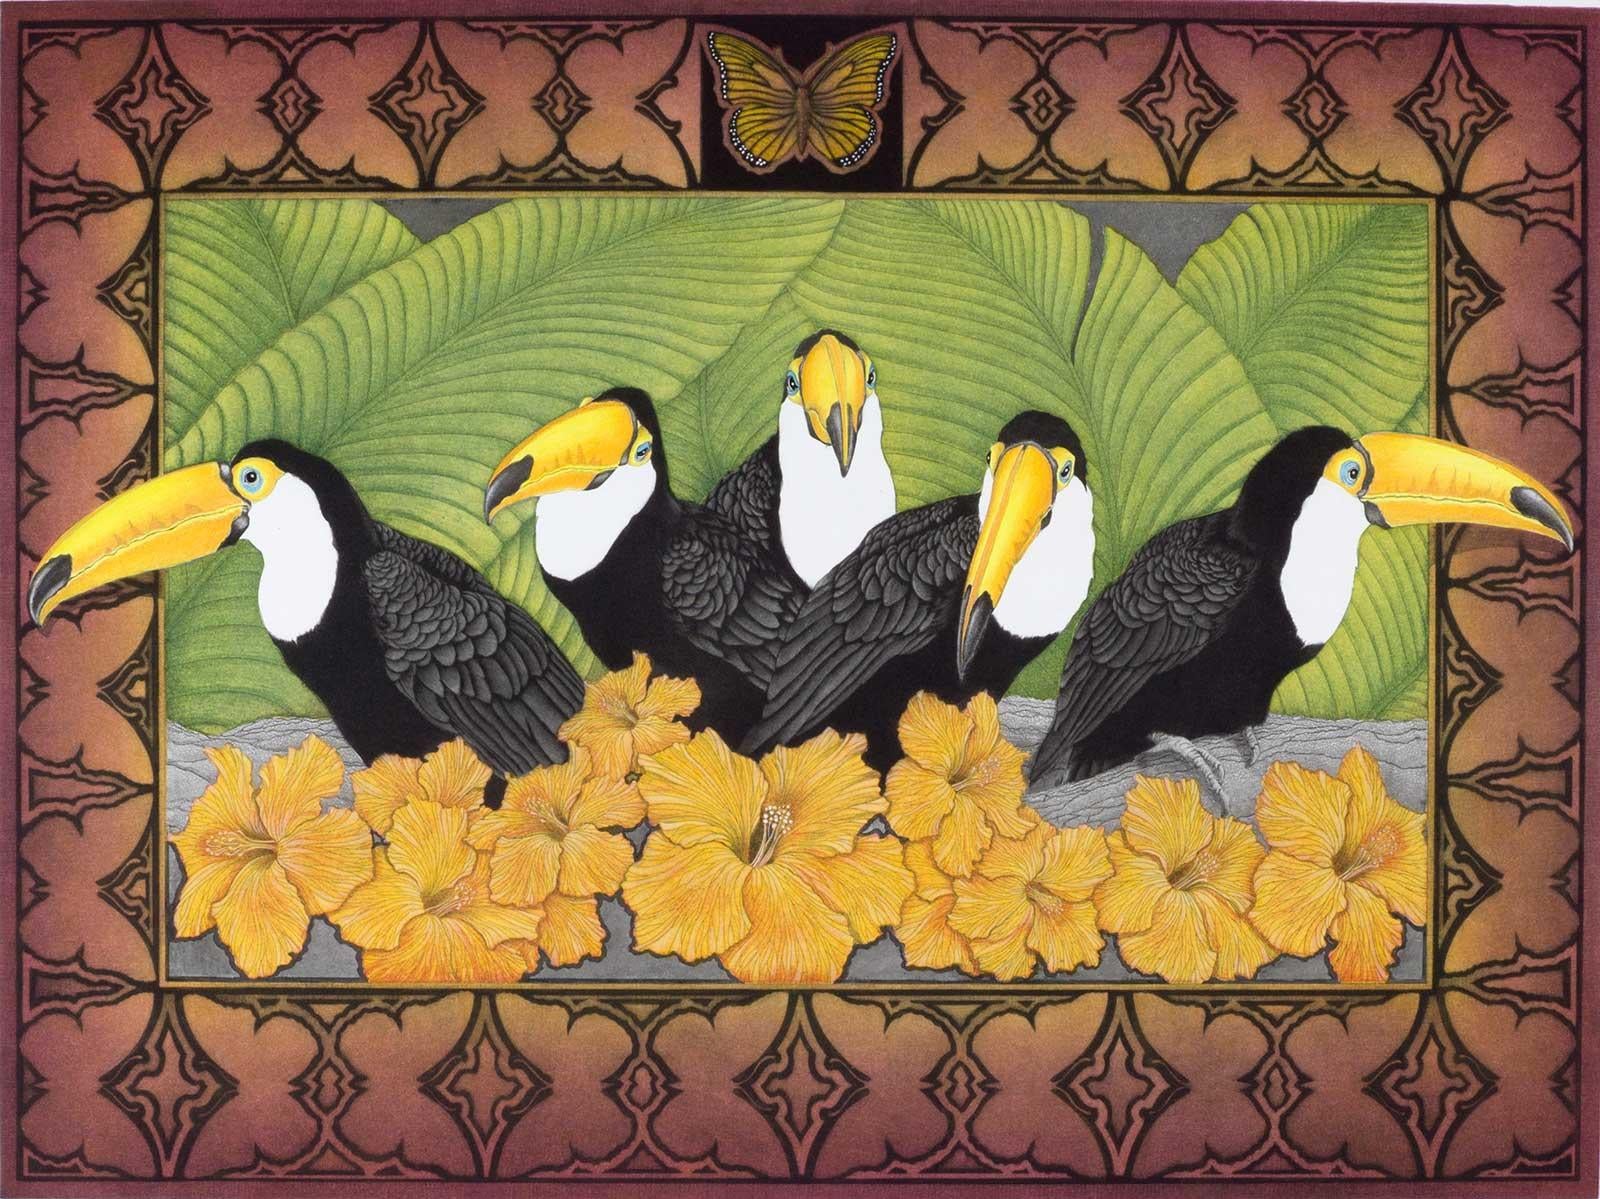 Rainforest Tapestry(colorful image of birds, ferns and flowers found in tropics)